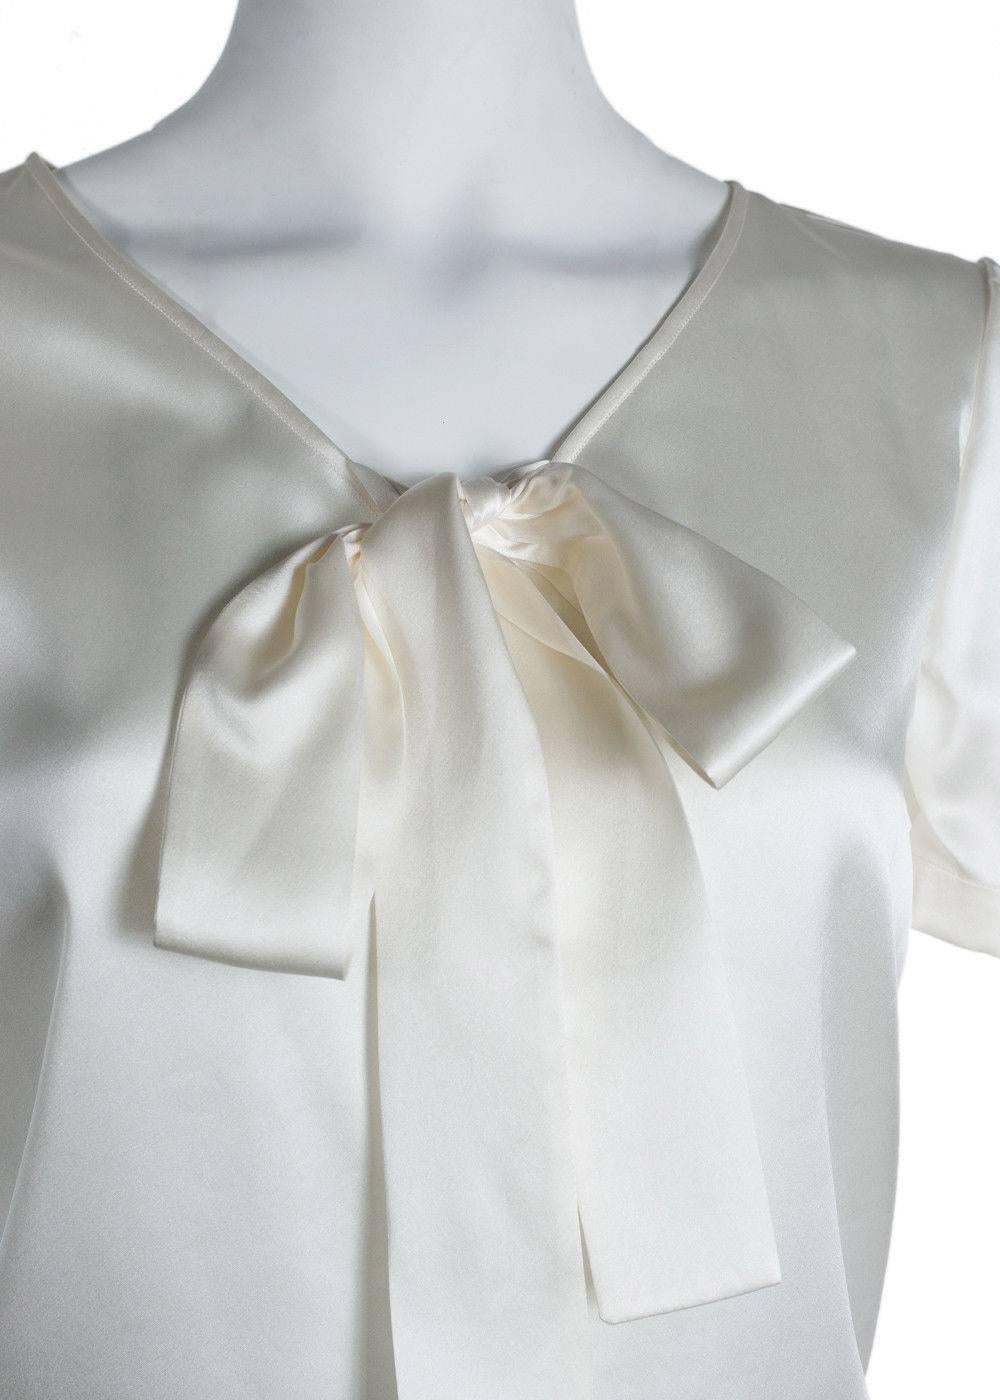 Brand New Saint Laurent Blouse
Original Tags & Hanger Included
Retails in Stores & Online for $1075
Size IT38 / US2 Fits True to Size

Saint Laurent's off white blouse made from 100% Silk for the ultimate soft and smooth feel to your skin. This silk